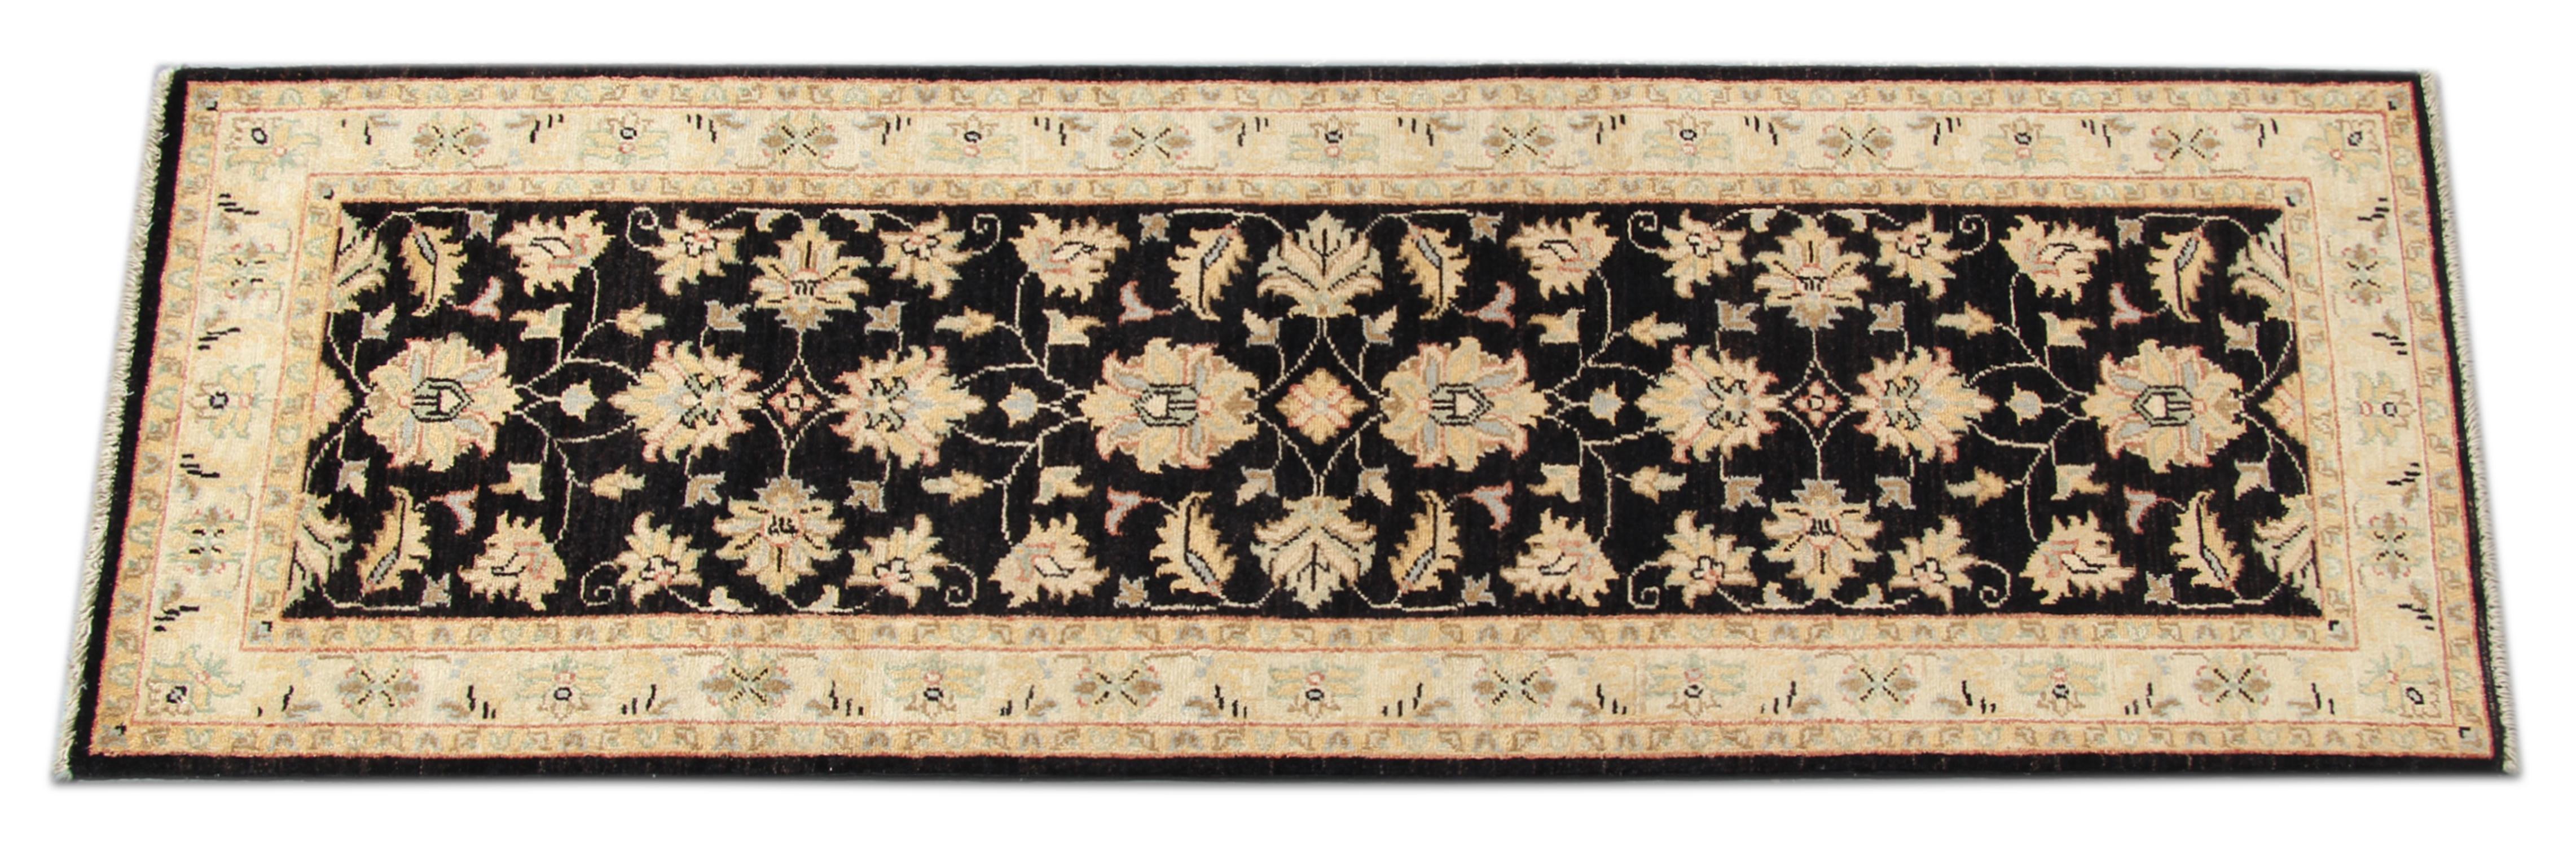 This golden black rug is Ziegler Sultanabad floral rug made on our own looms by our master weavers in Afghanistan. This carpet rug is made with all-natural vegetable dyes and all hand-spun wool. The large rug scale design makes these carpet runners